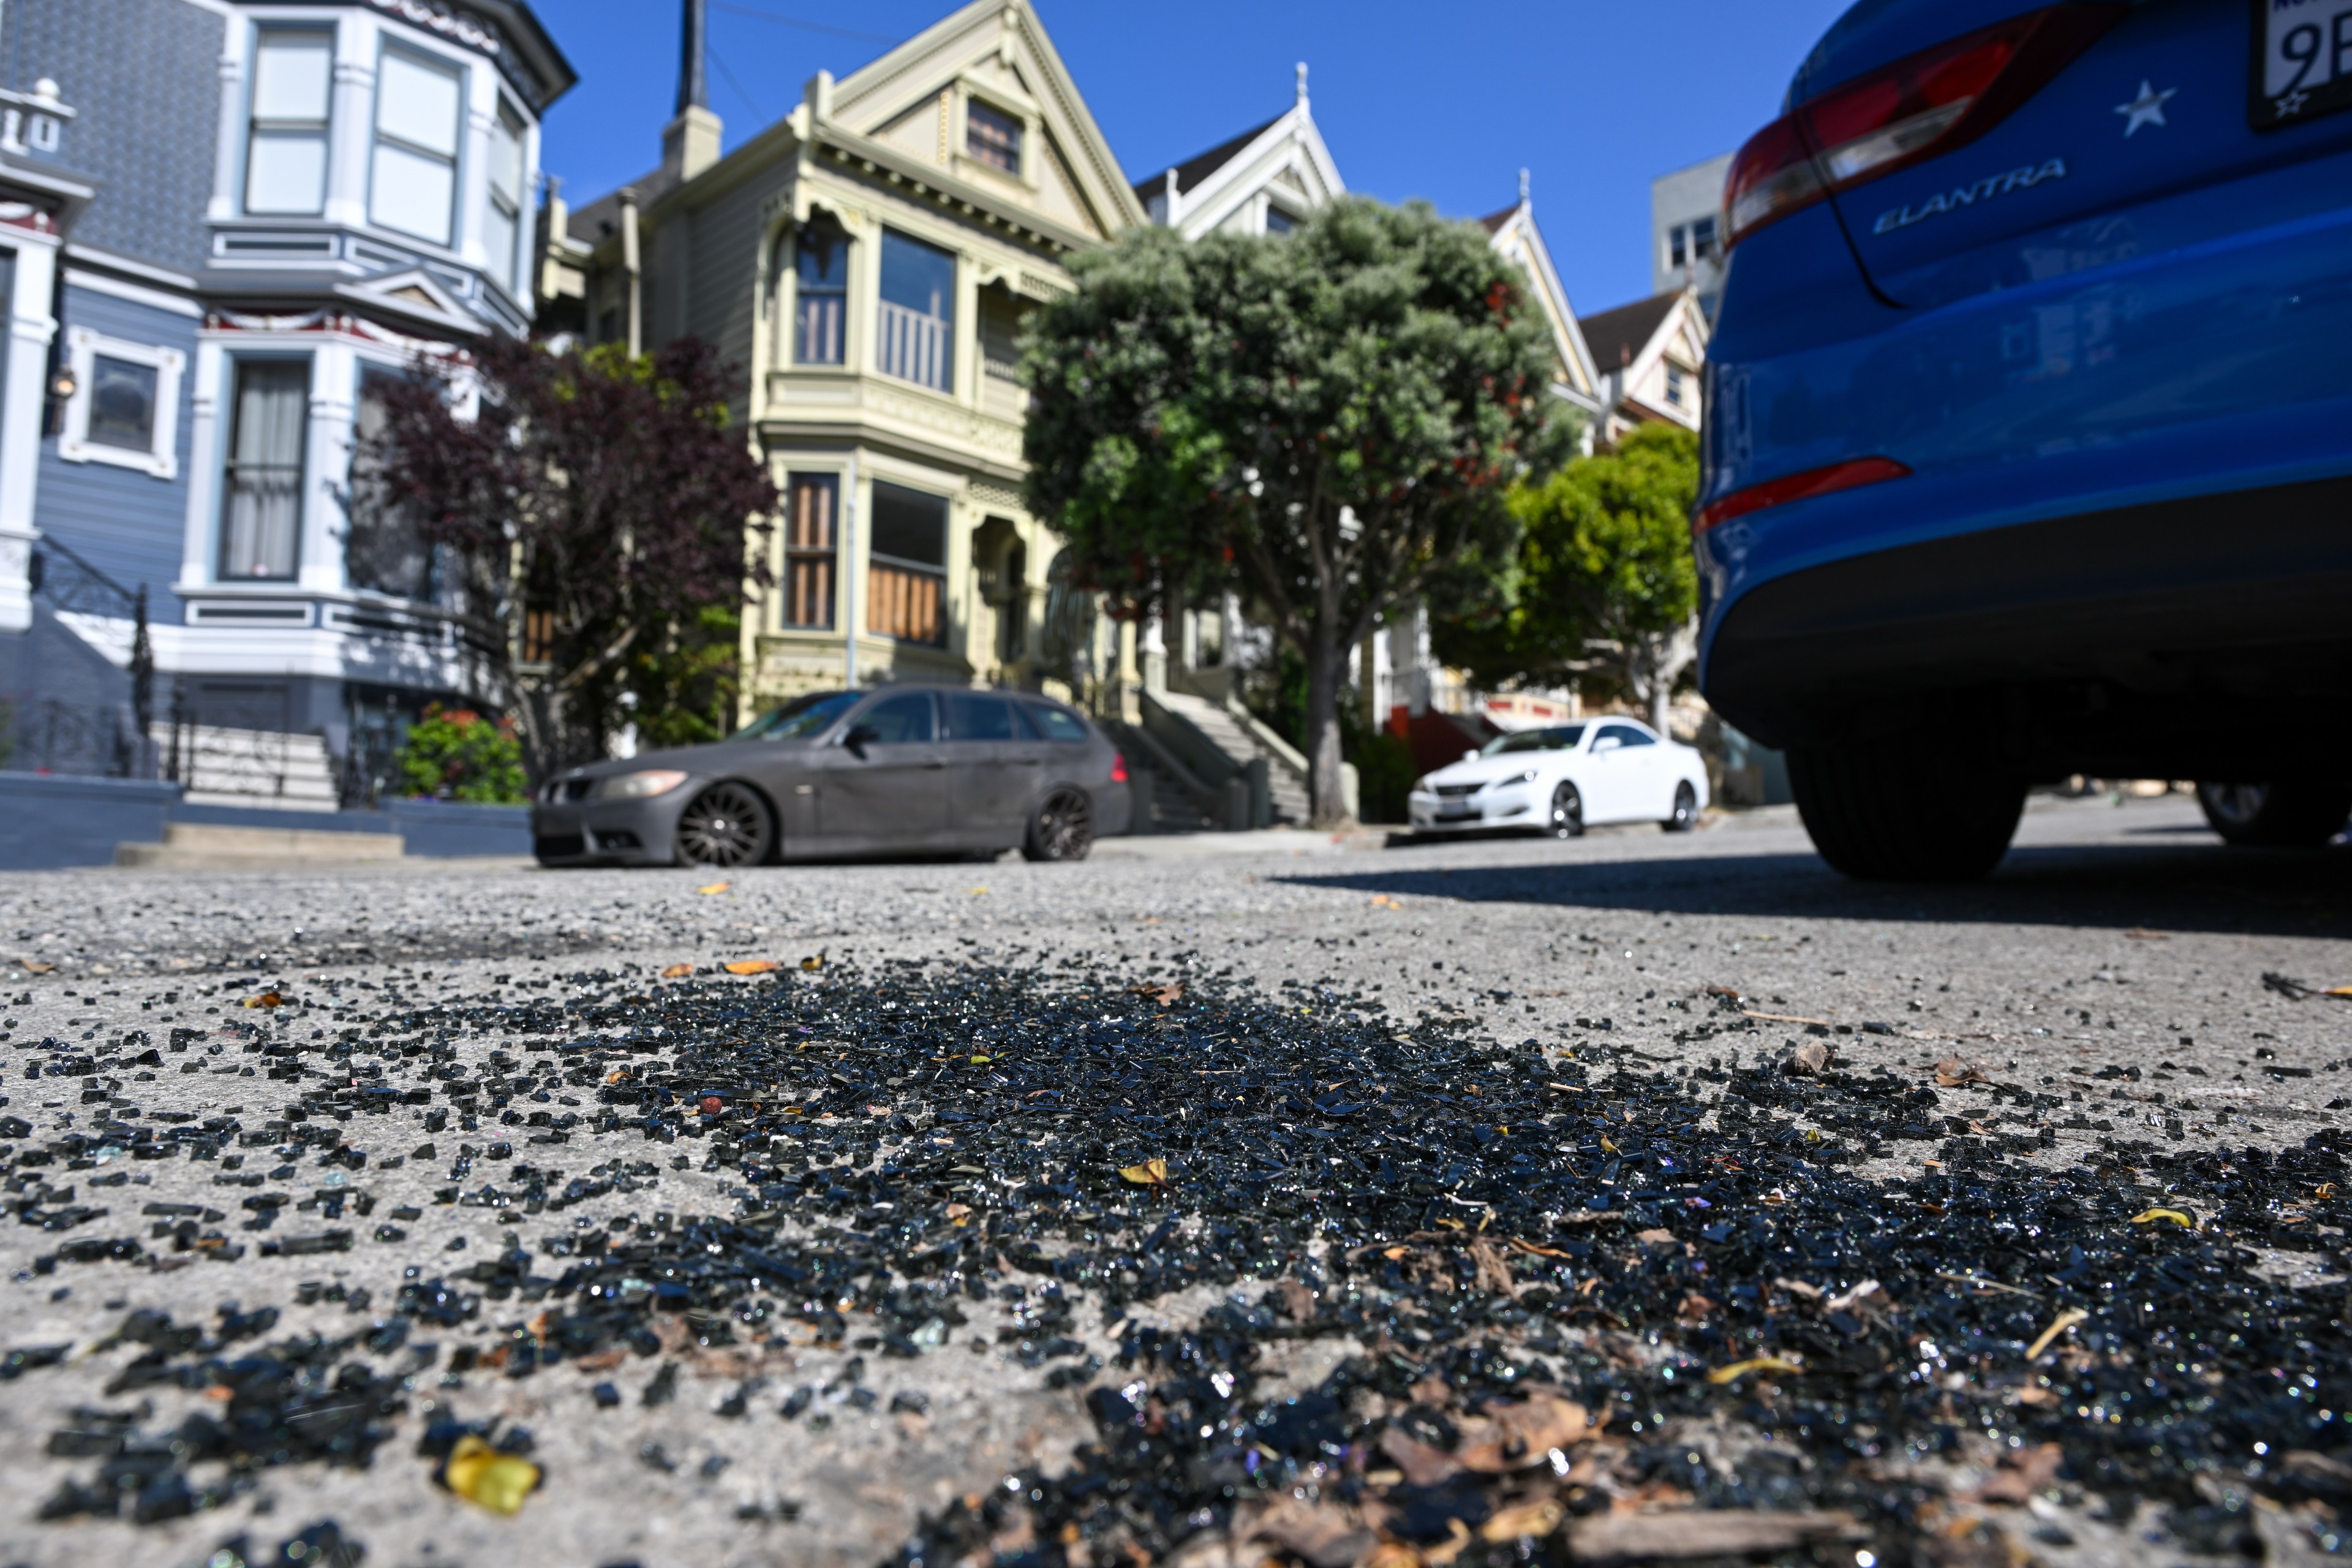 San Francisco Police Have Solved Very Few Car Break-Ins So Far This Year